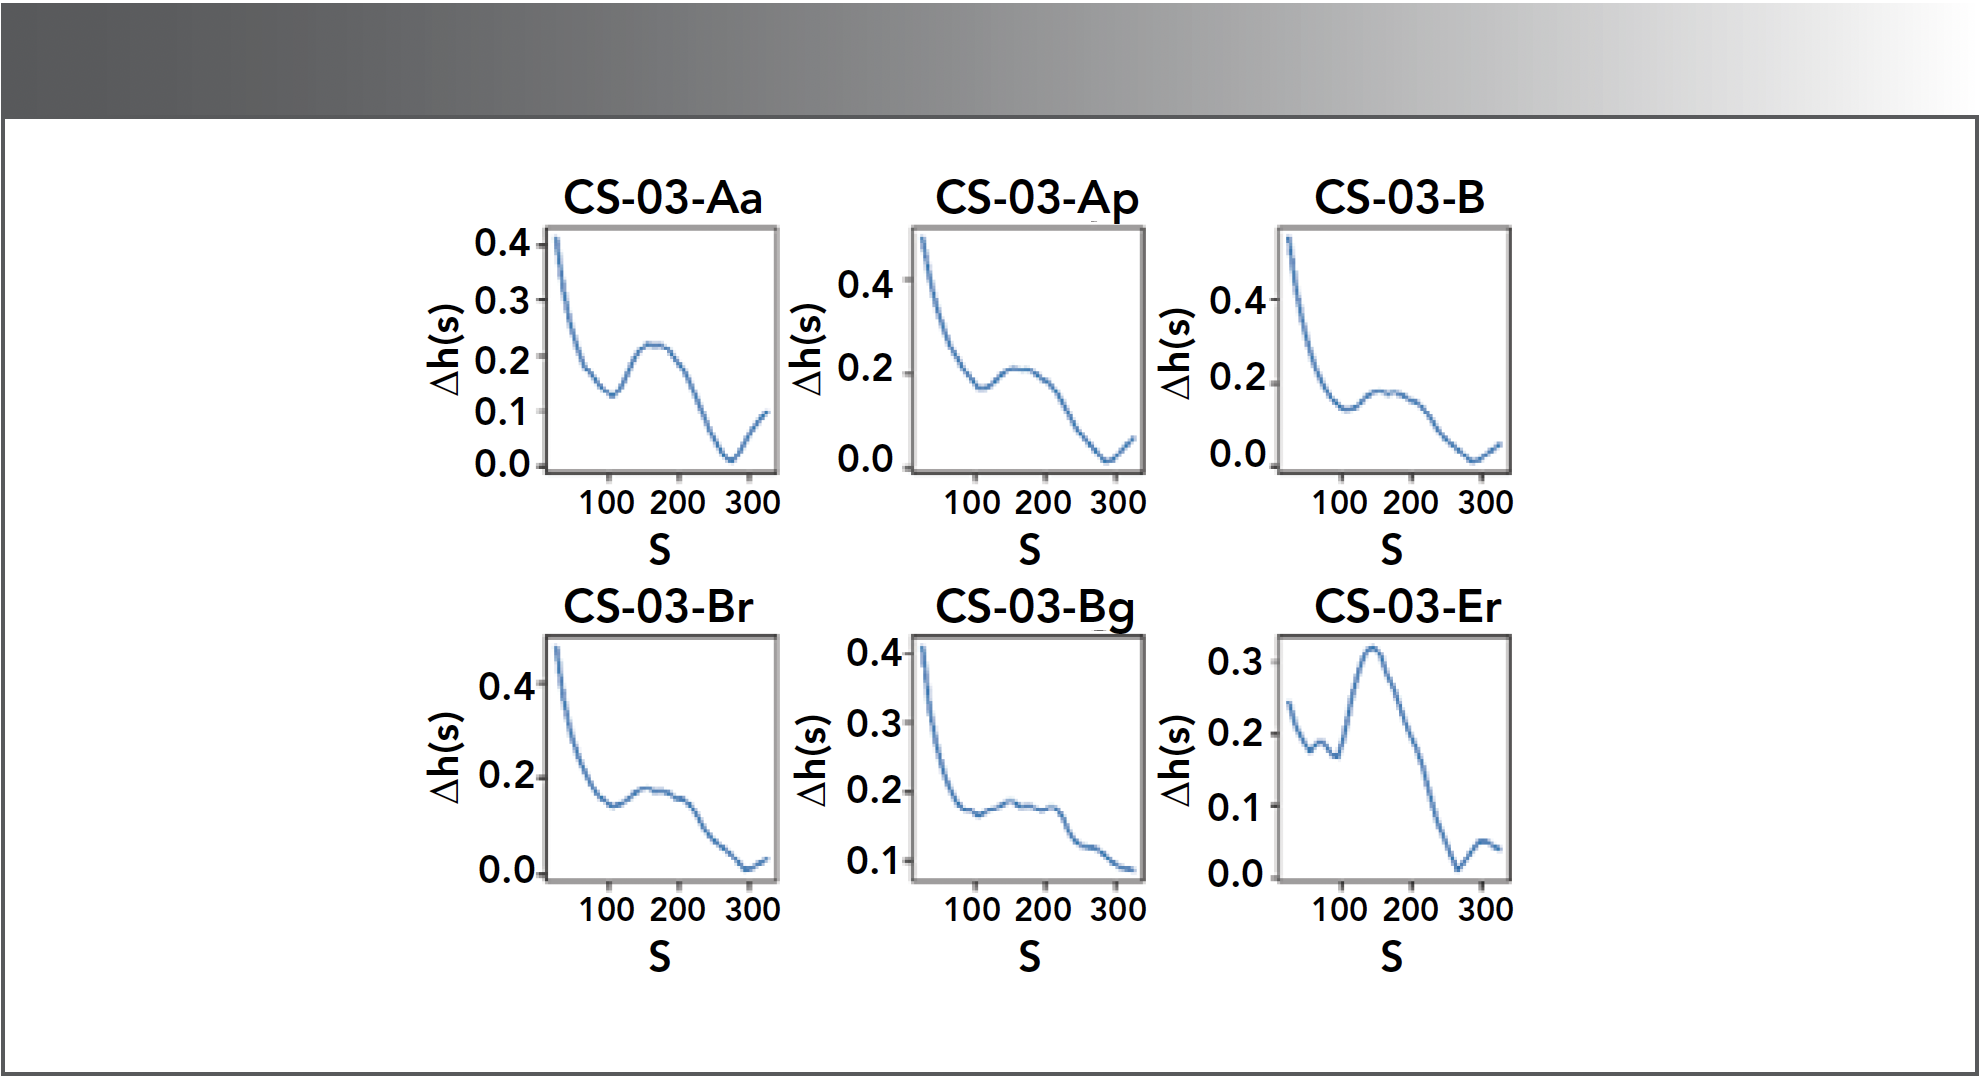 FIGURE 3: Multifractal characteristics variation across different fitting windows. Δh(s) = maxq(h(q,s)) - minq(h(q,s)) is with respect to the length of fitting window s. The six samples originate from sampling site CS03 at various soil depths.